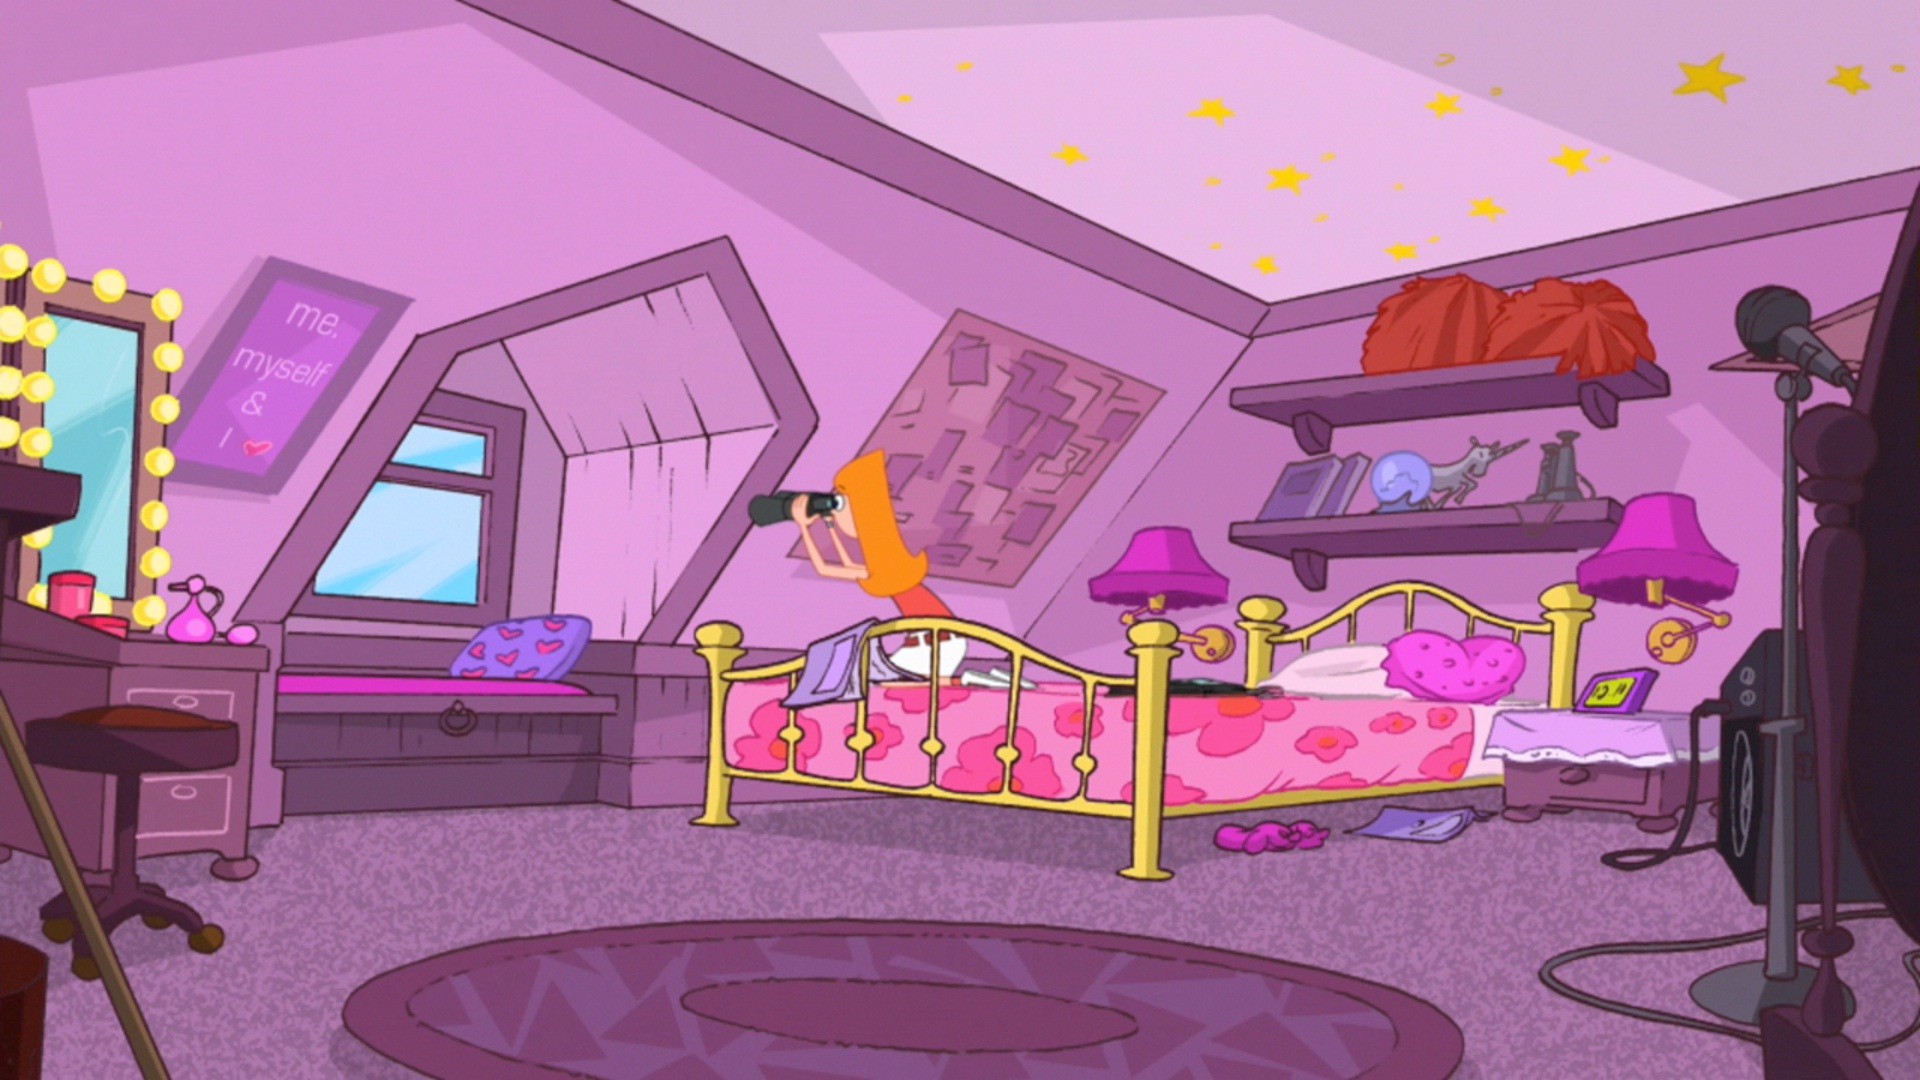 Candace's_room_Split_Personality01